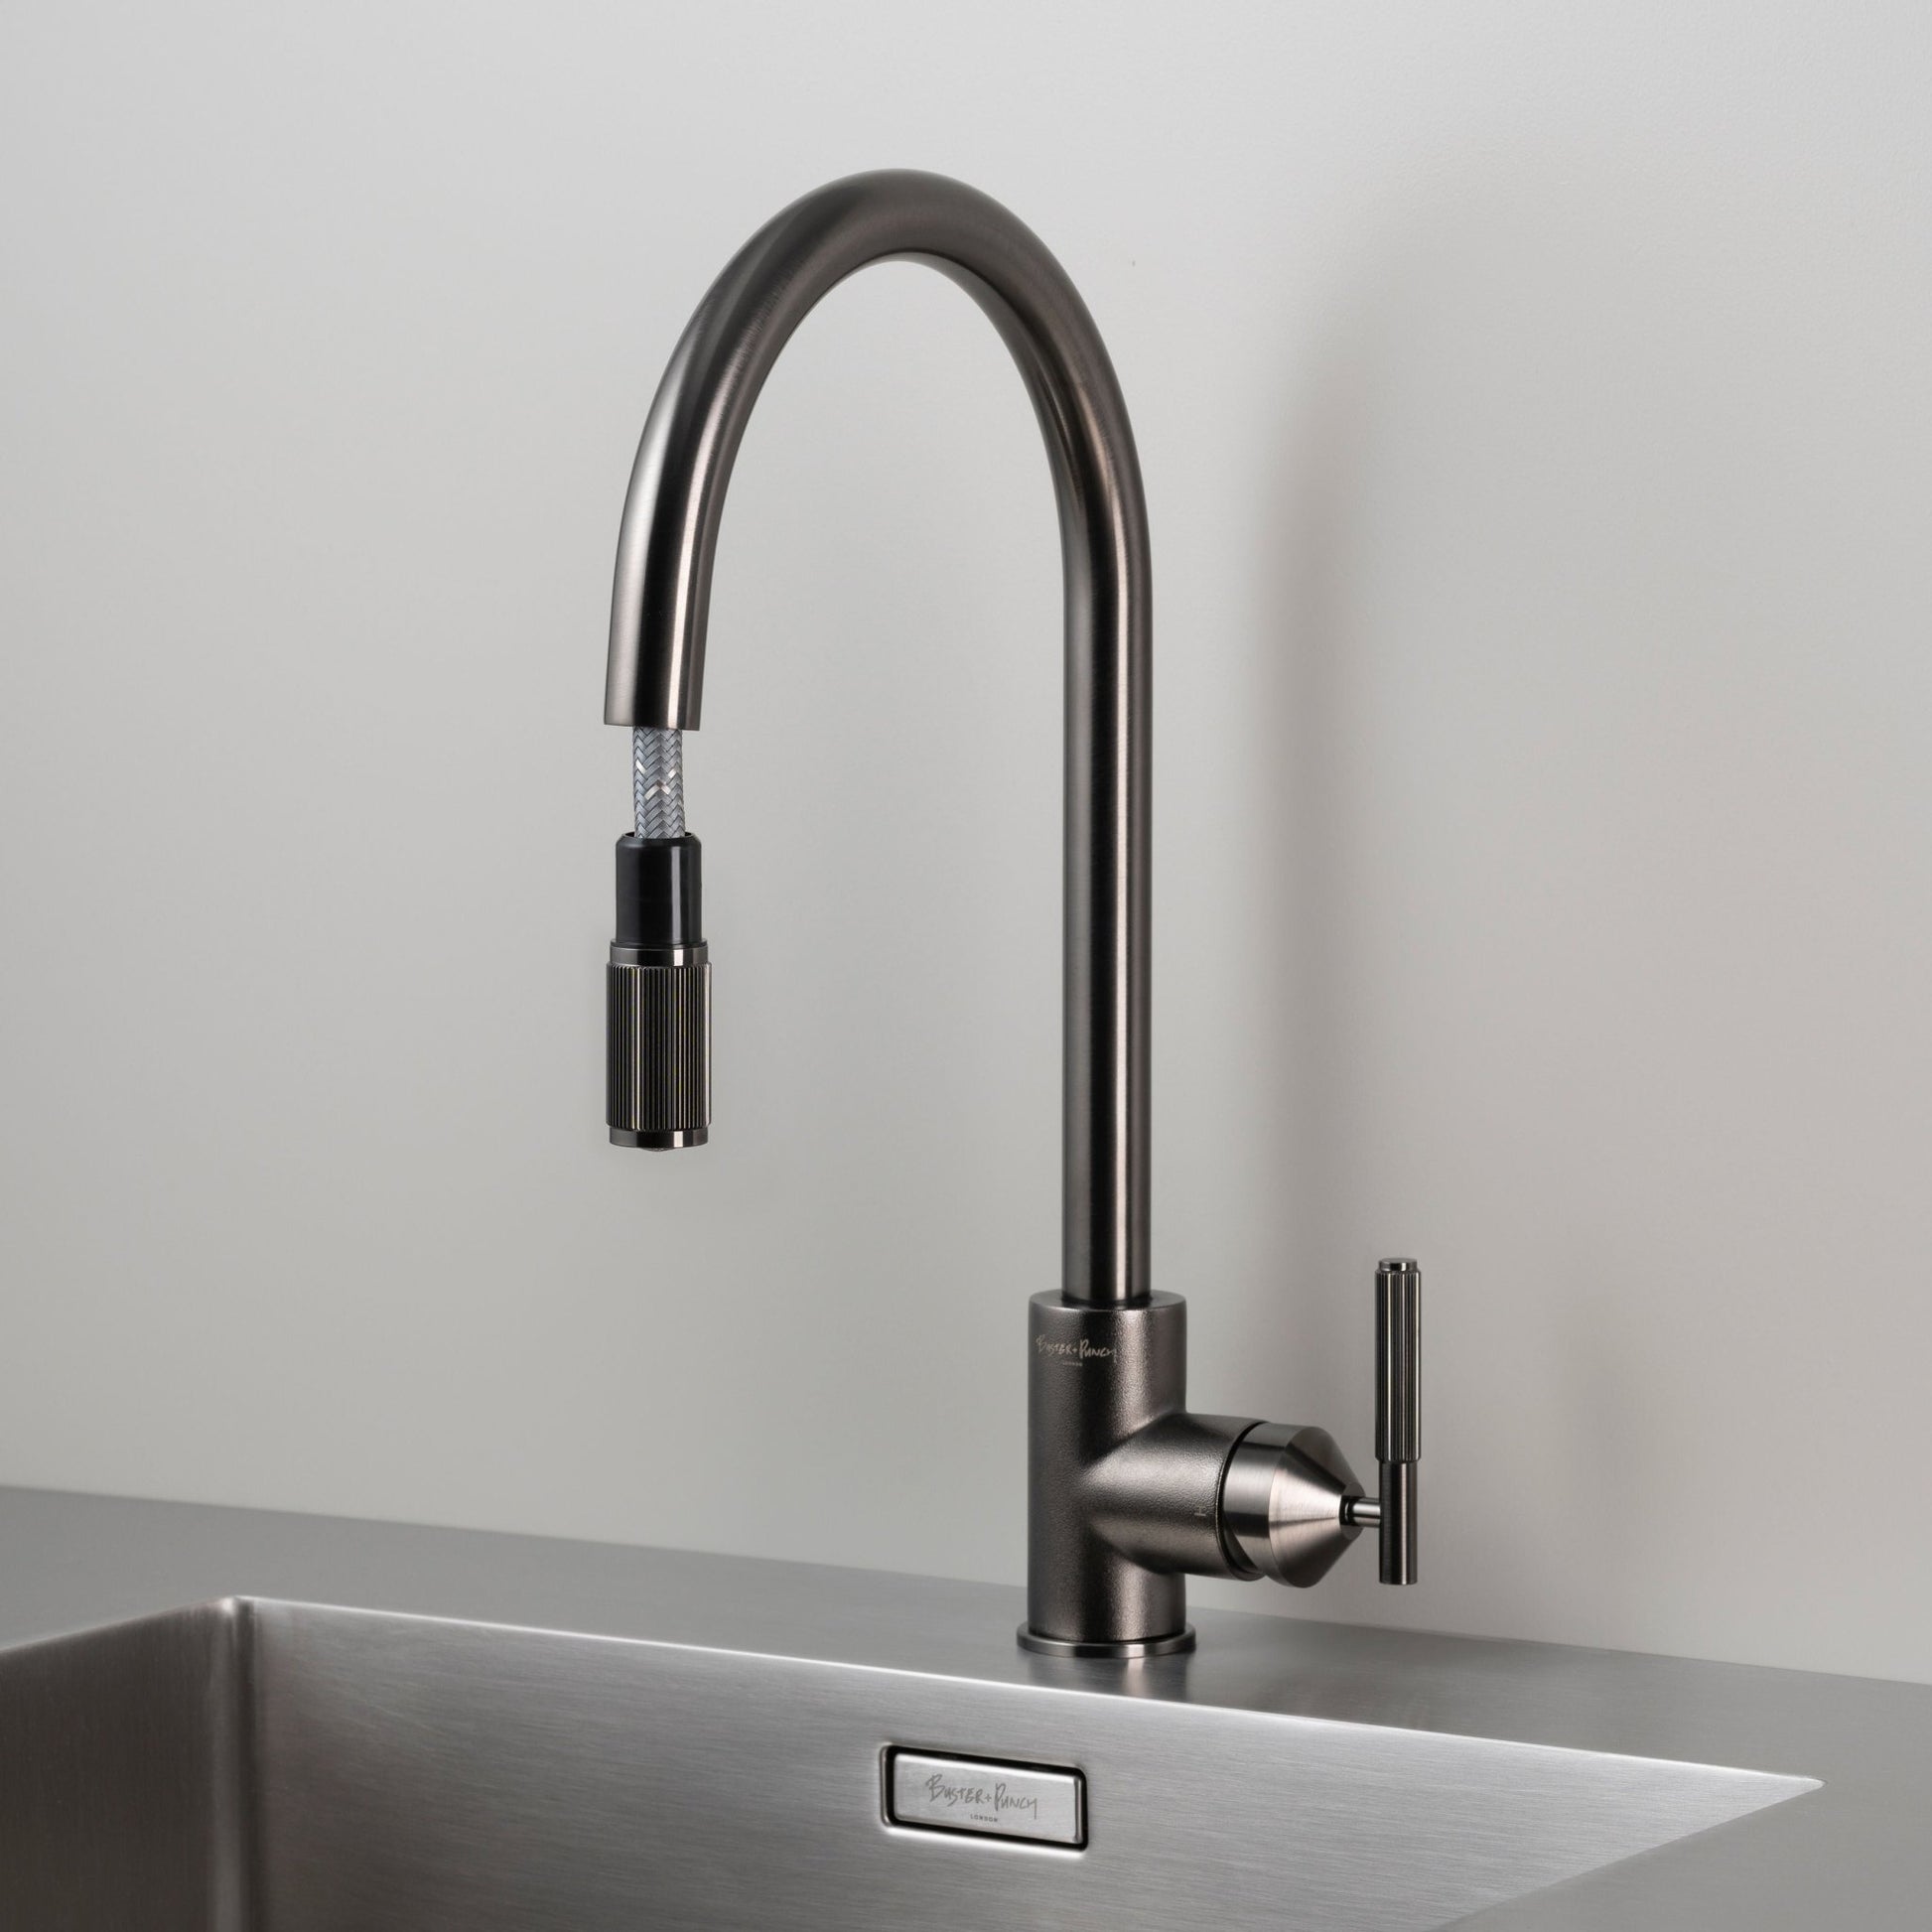 Luxury Buster and Punch Pull Out Kitchen Faucet GUN METAL - |VESIMI Design| Luxury and Rustic bathrooms online